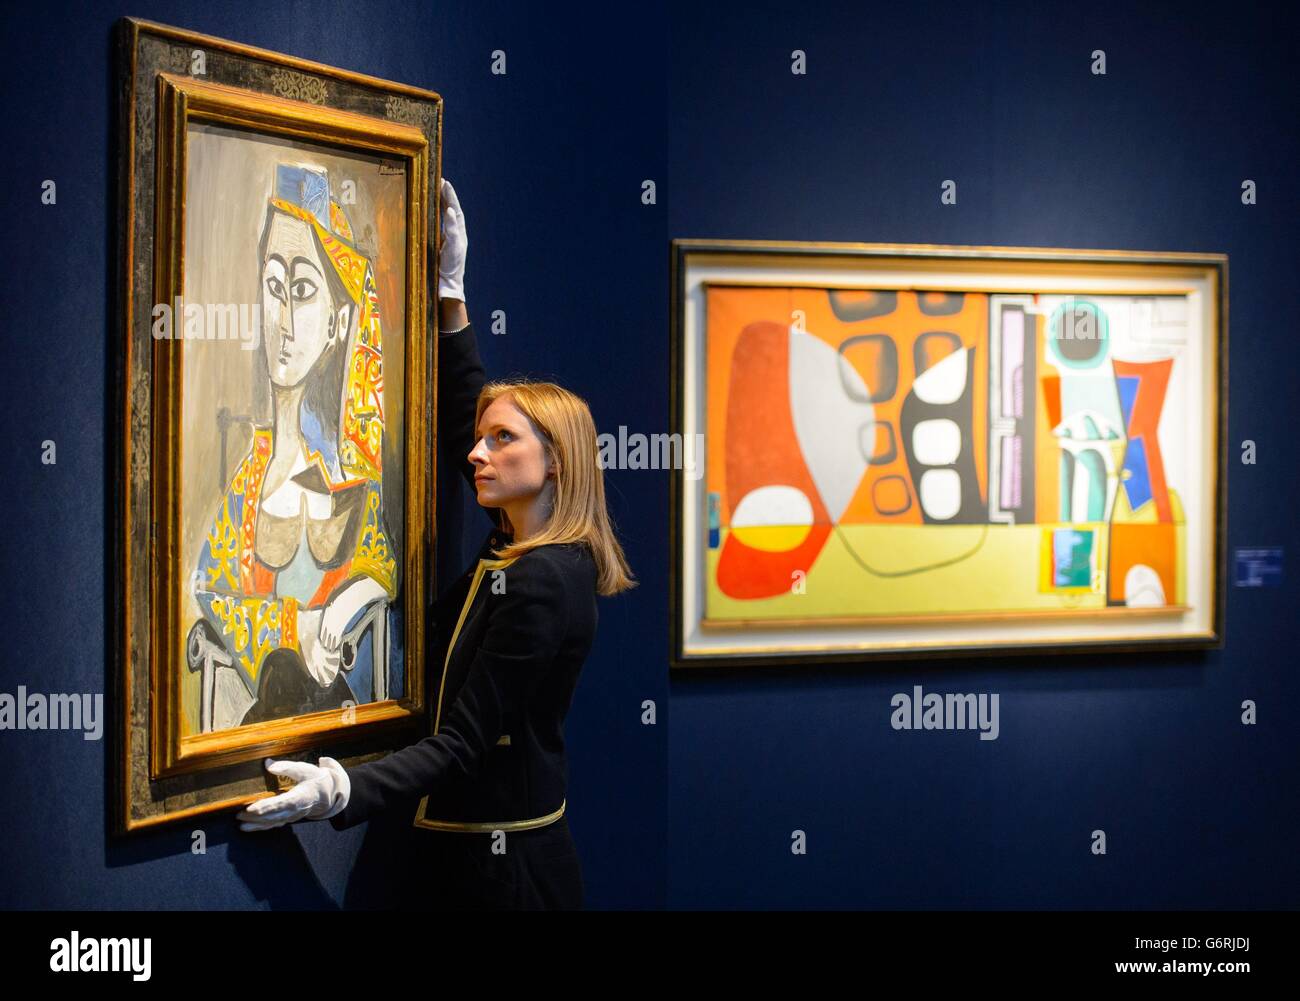 Christie's employee Amber Hailes adjusts Pablo Picasso's 'Femme au costume turc dans un fauteuil', 1955, which is expected to fetch &Acirc;&pound;15 million, next to the &Acirc;&pound;300,000 estimated painting 'Annibal Simla' by Le Corbusier, as part of Christie's Impressionist, Modern and Surrealist Art sale next month. Stock Photo